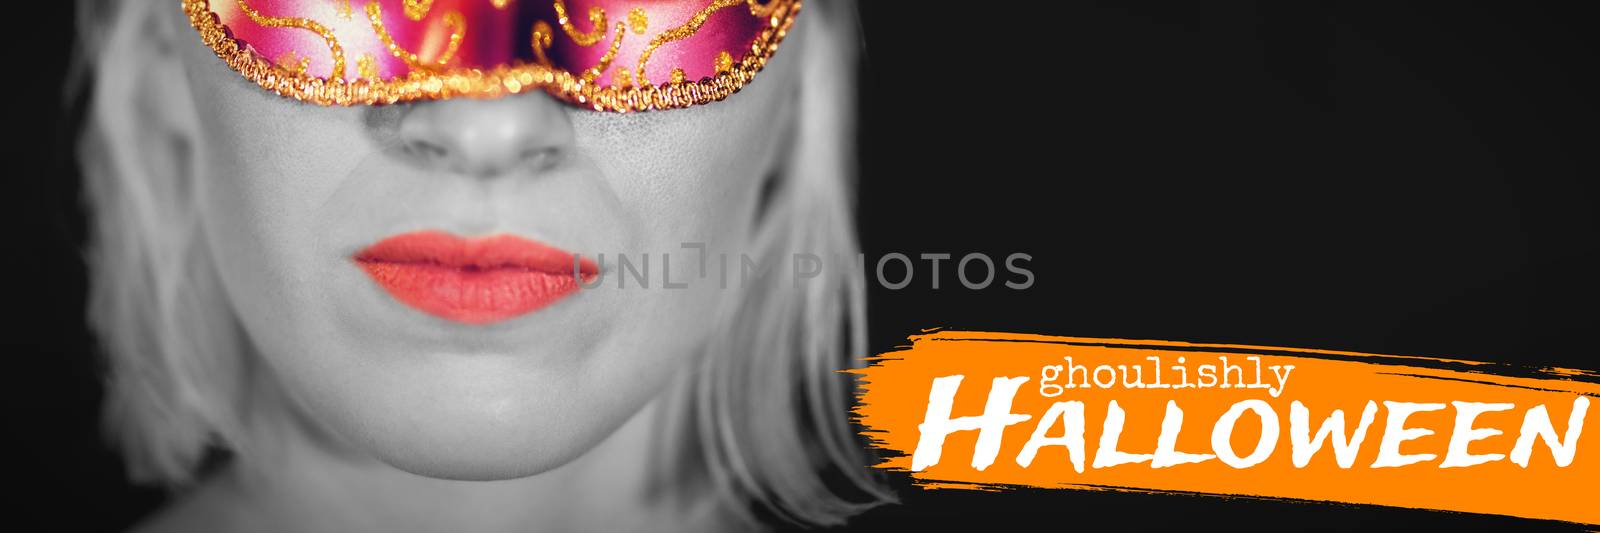 Graphic image of ghoulishly Halloween text against close-up portrait of woman in masquerade mask